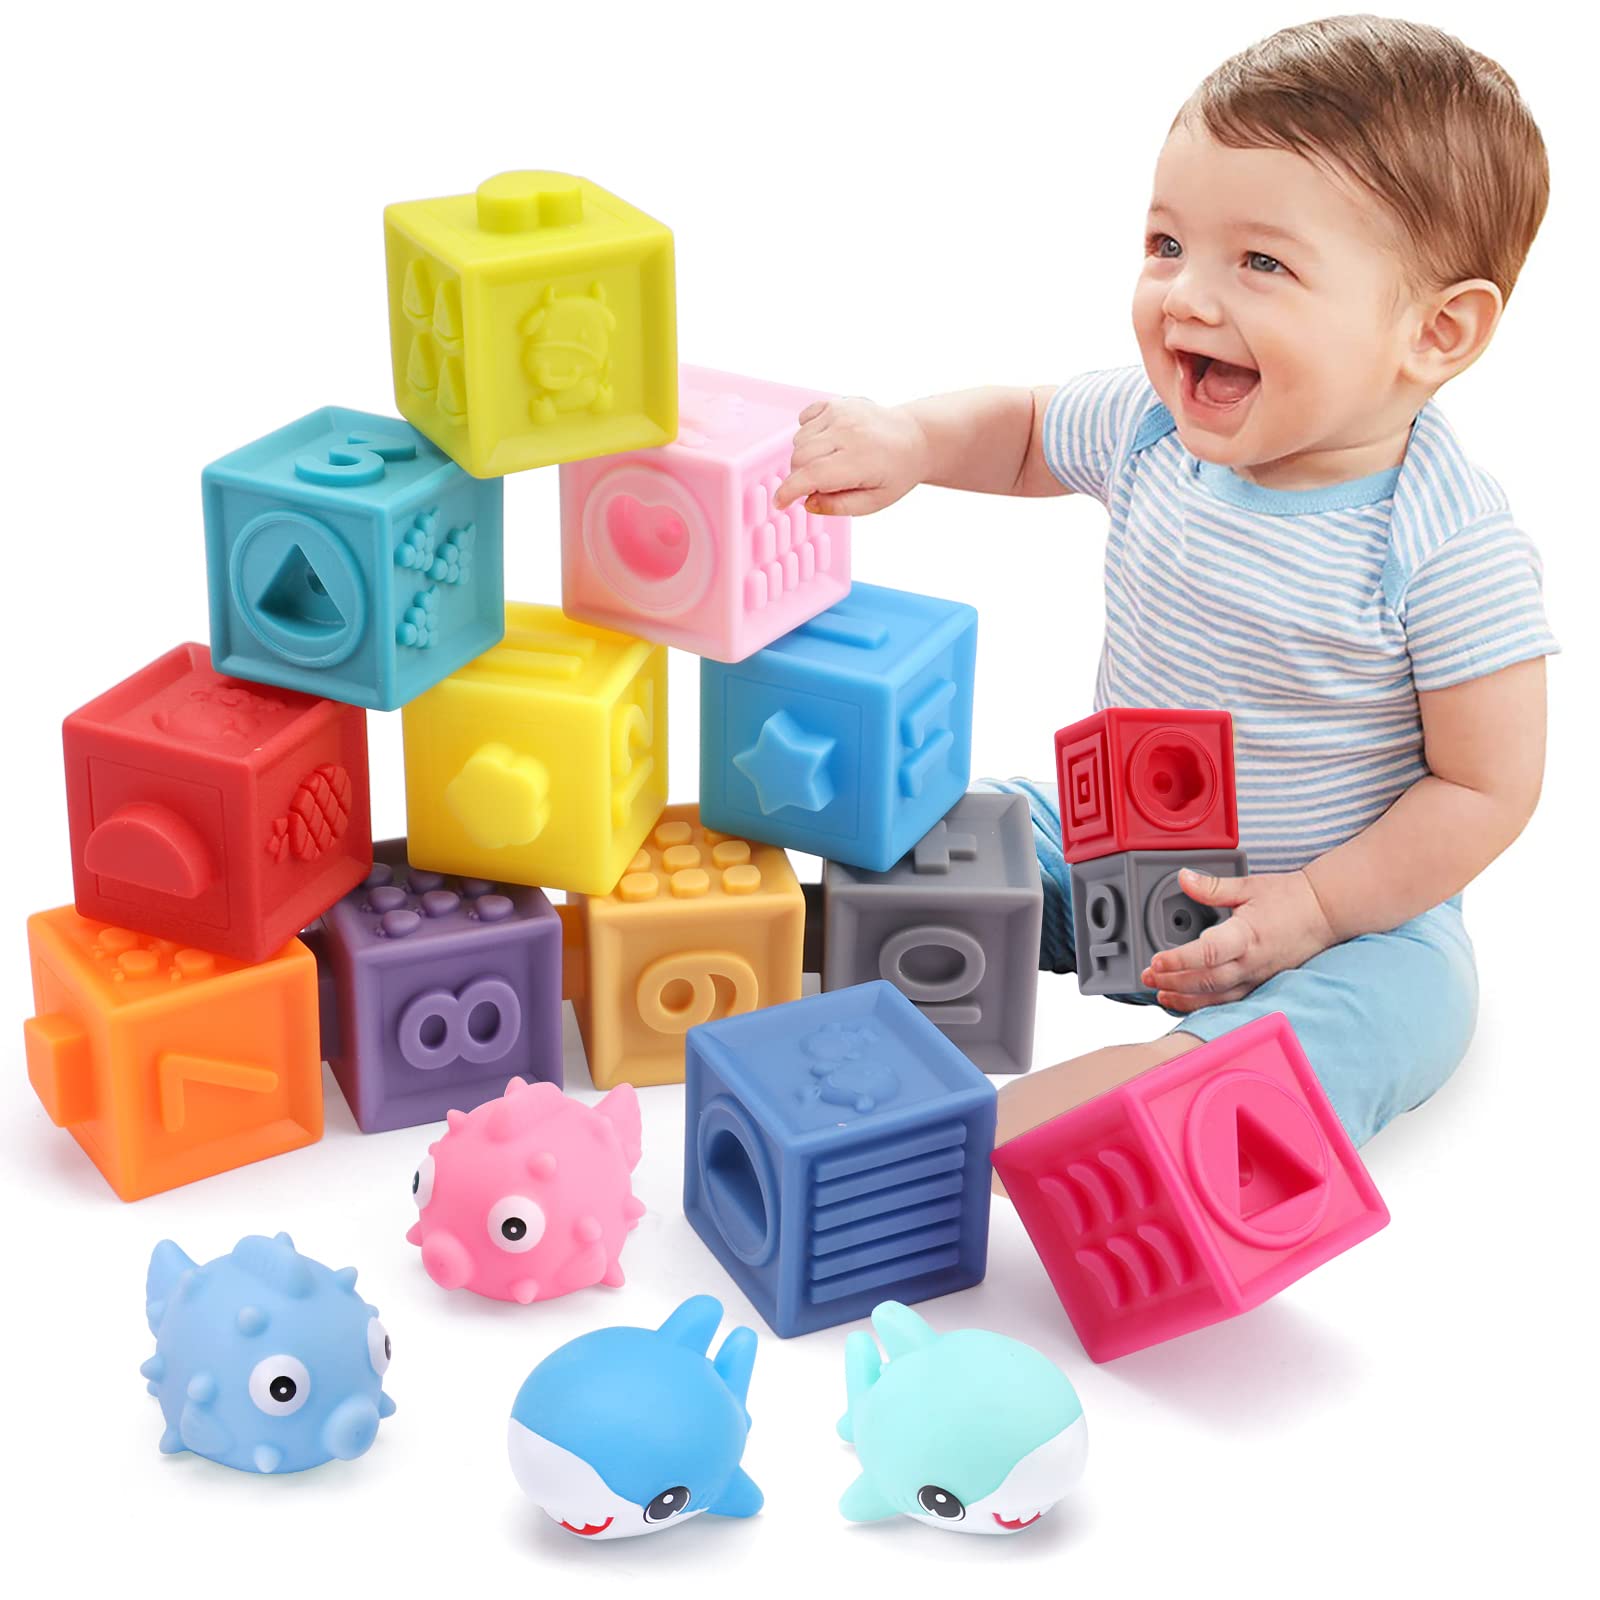 OWNONE 1 Baby Soft Blocks, 16PCS Stacking Building Blocks for Toddlers 1-3, Teething & Sensory Toys for Babies Infant 6 9 10 12 18 Months, Learning Developmental Toys for Boys & Girls 1 2 3 Years Old